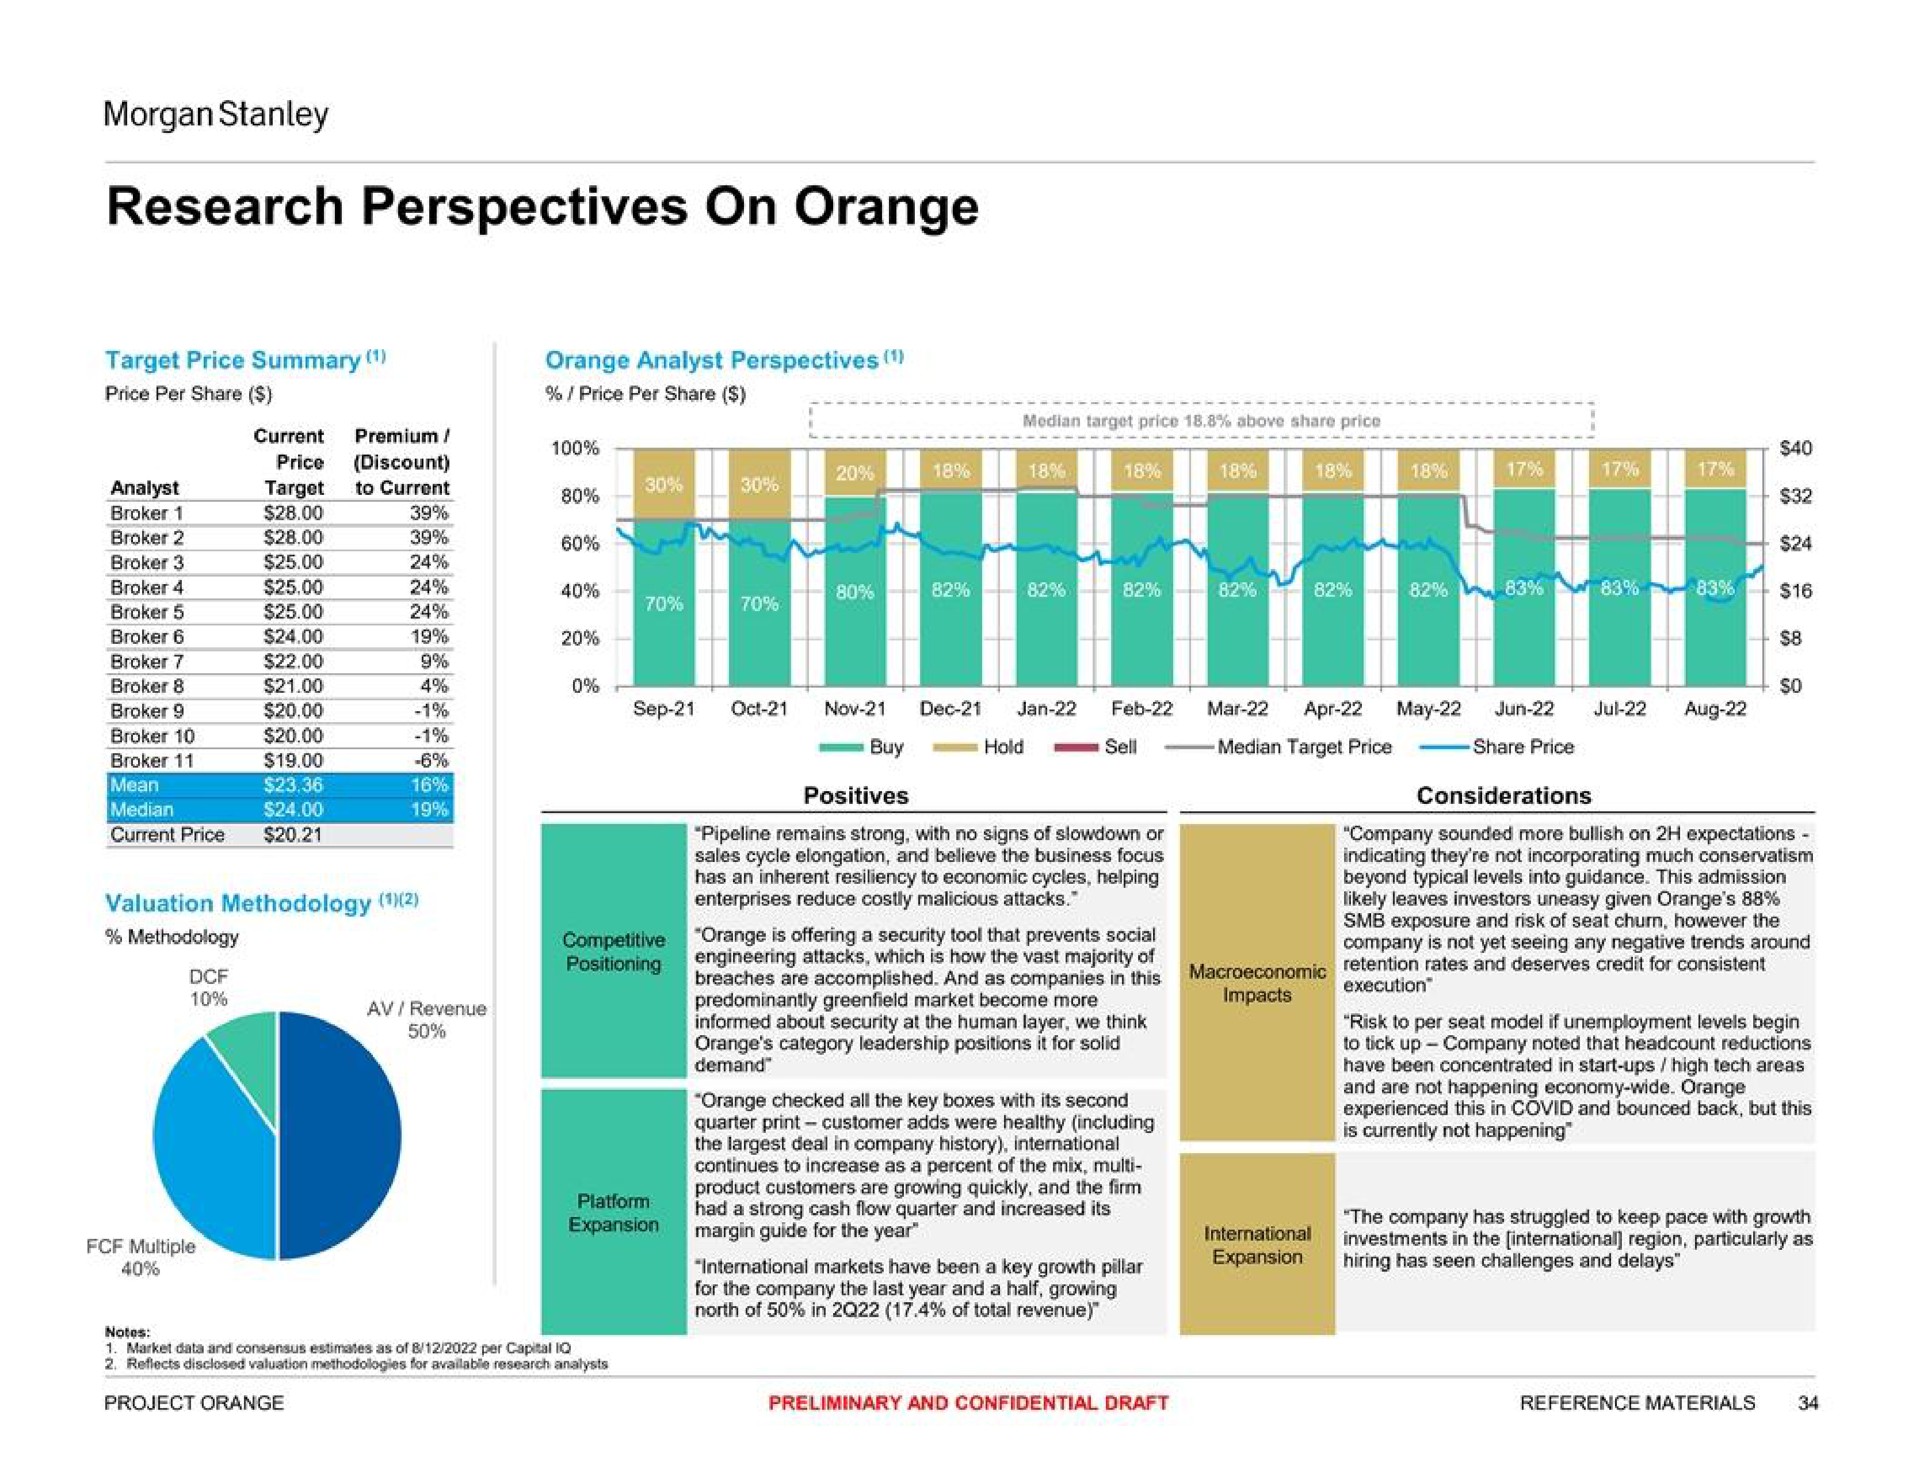 research perspectives on orange | Morgan Stanley